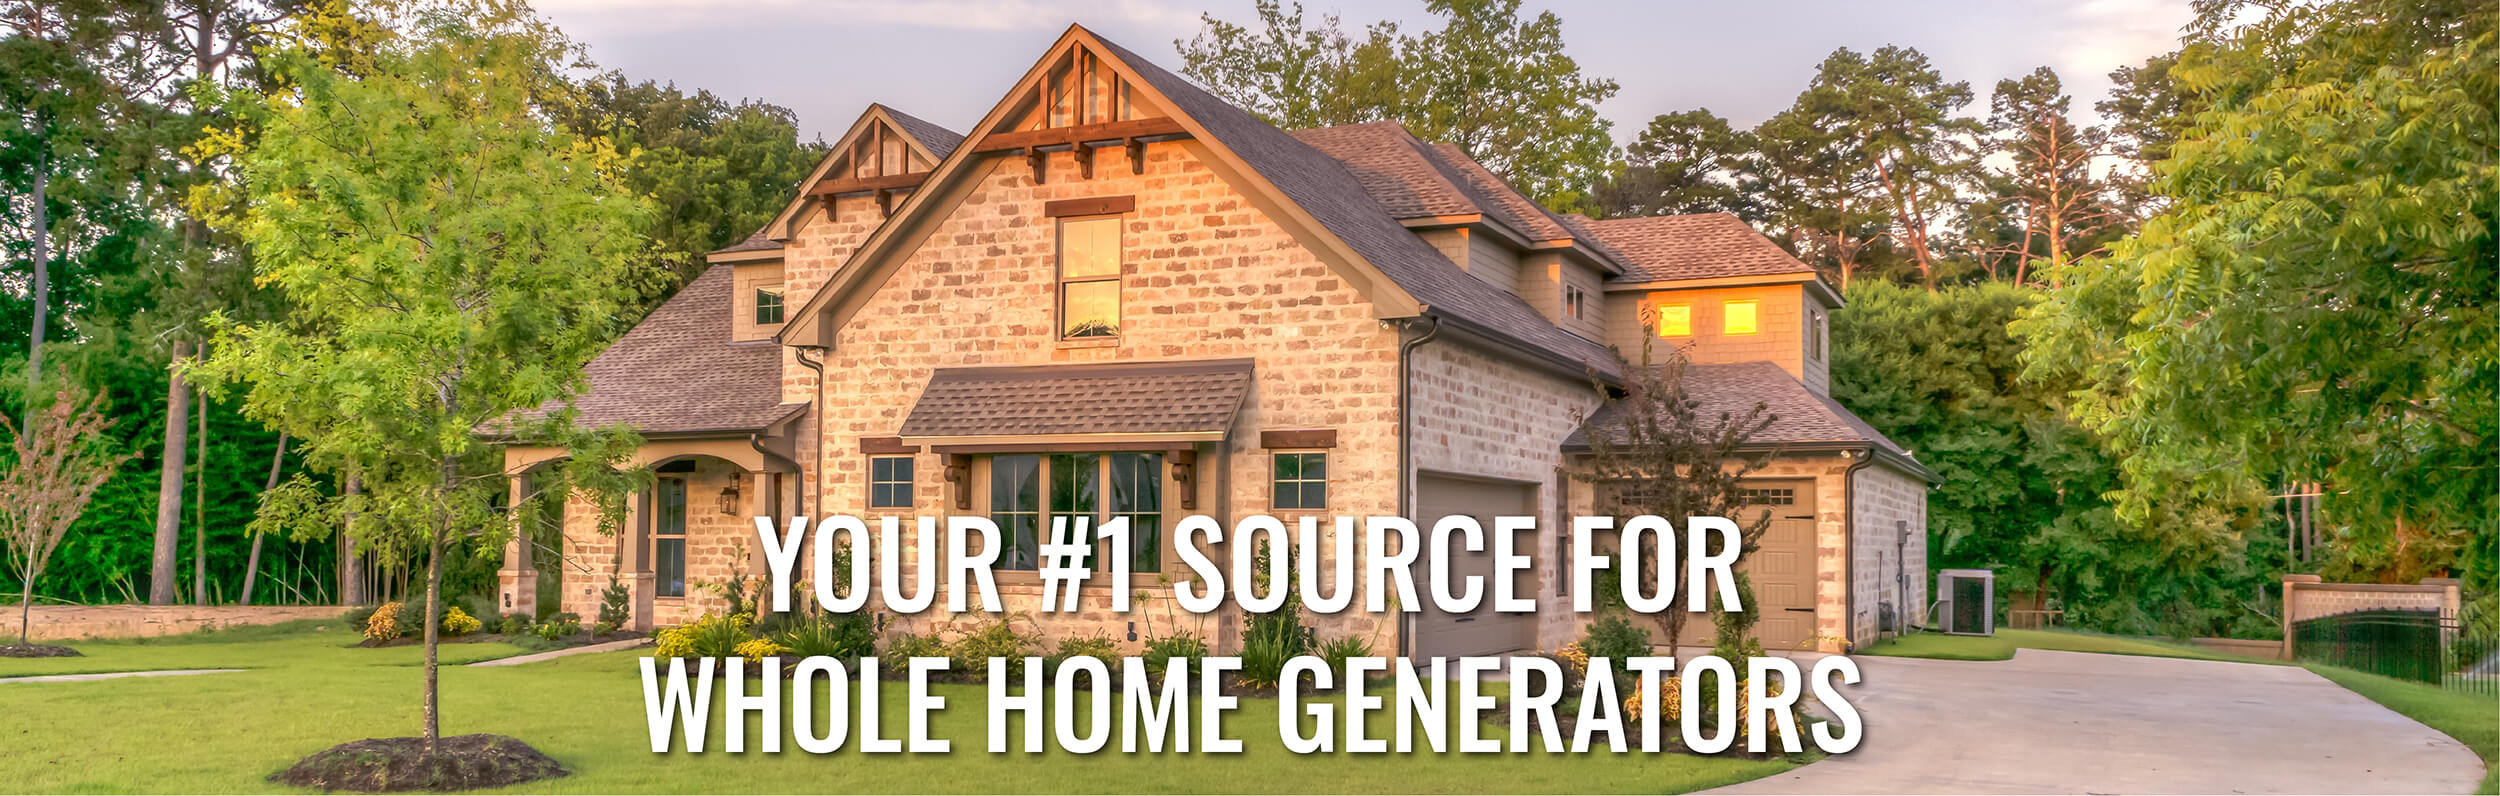 Your #1 source for whole home generators